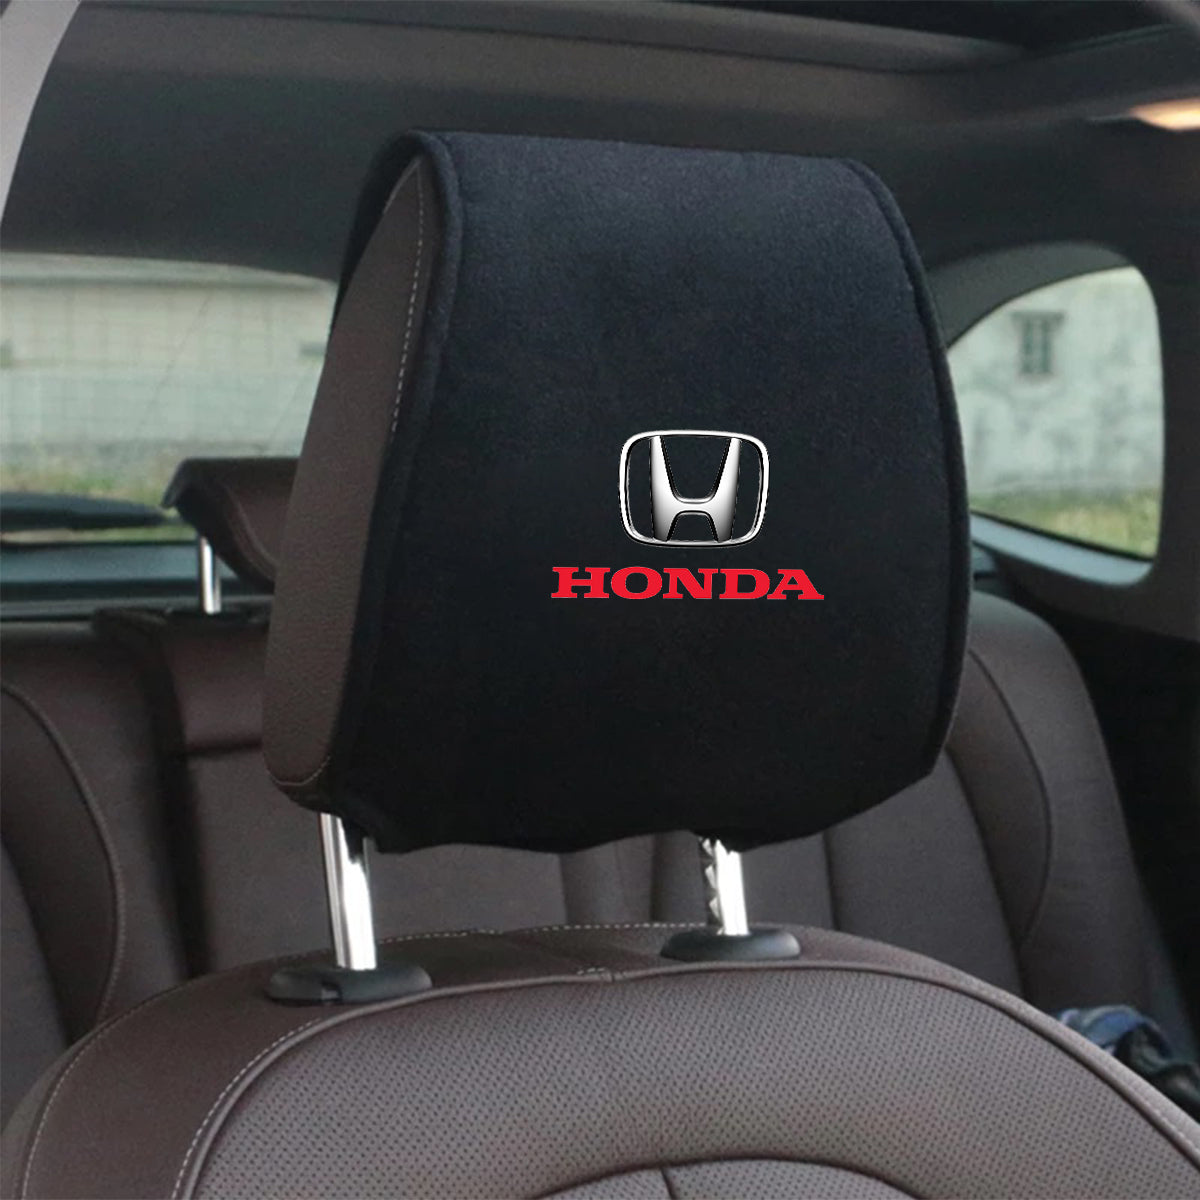 Honda Car Seat Headrest Cover: Stylish Protection for Your Vehicle's Headrests